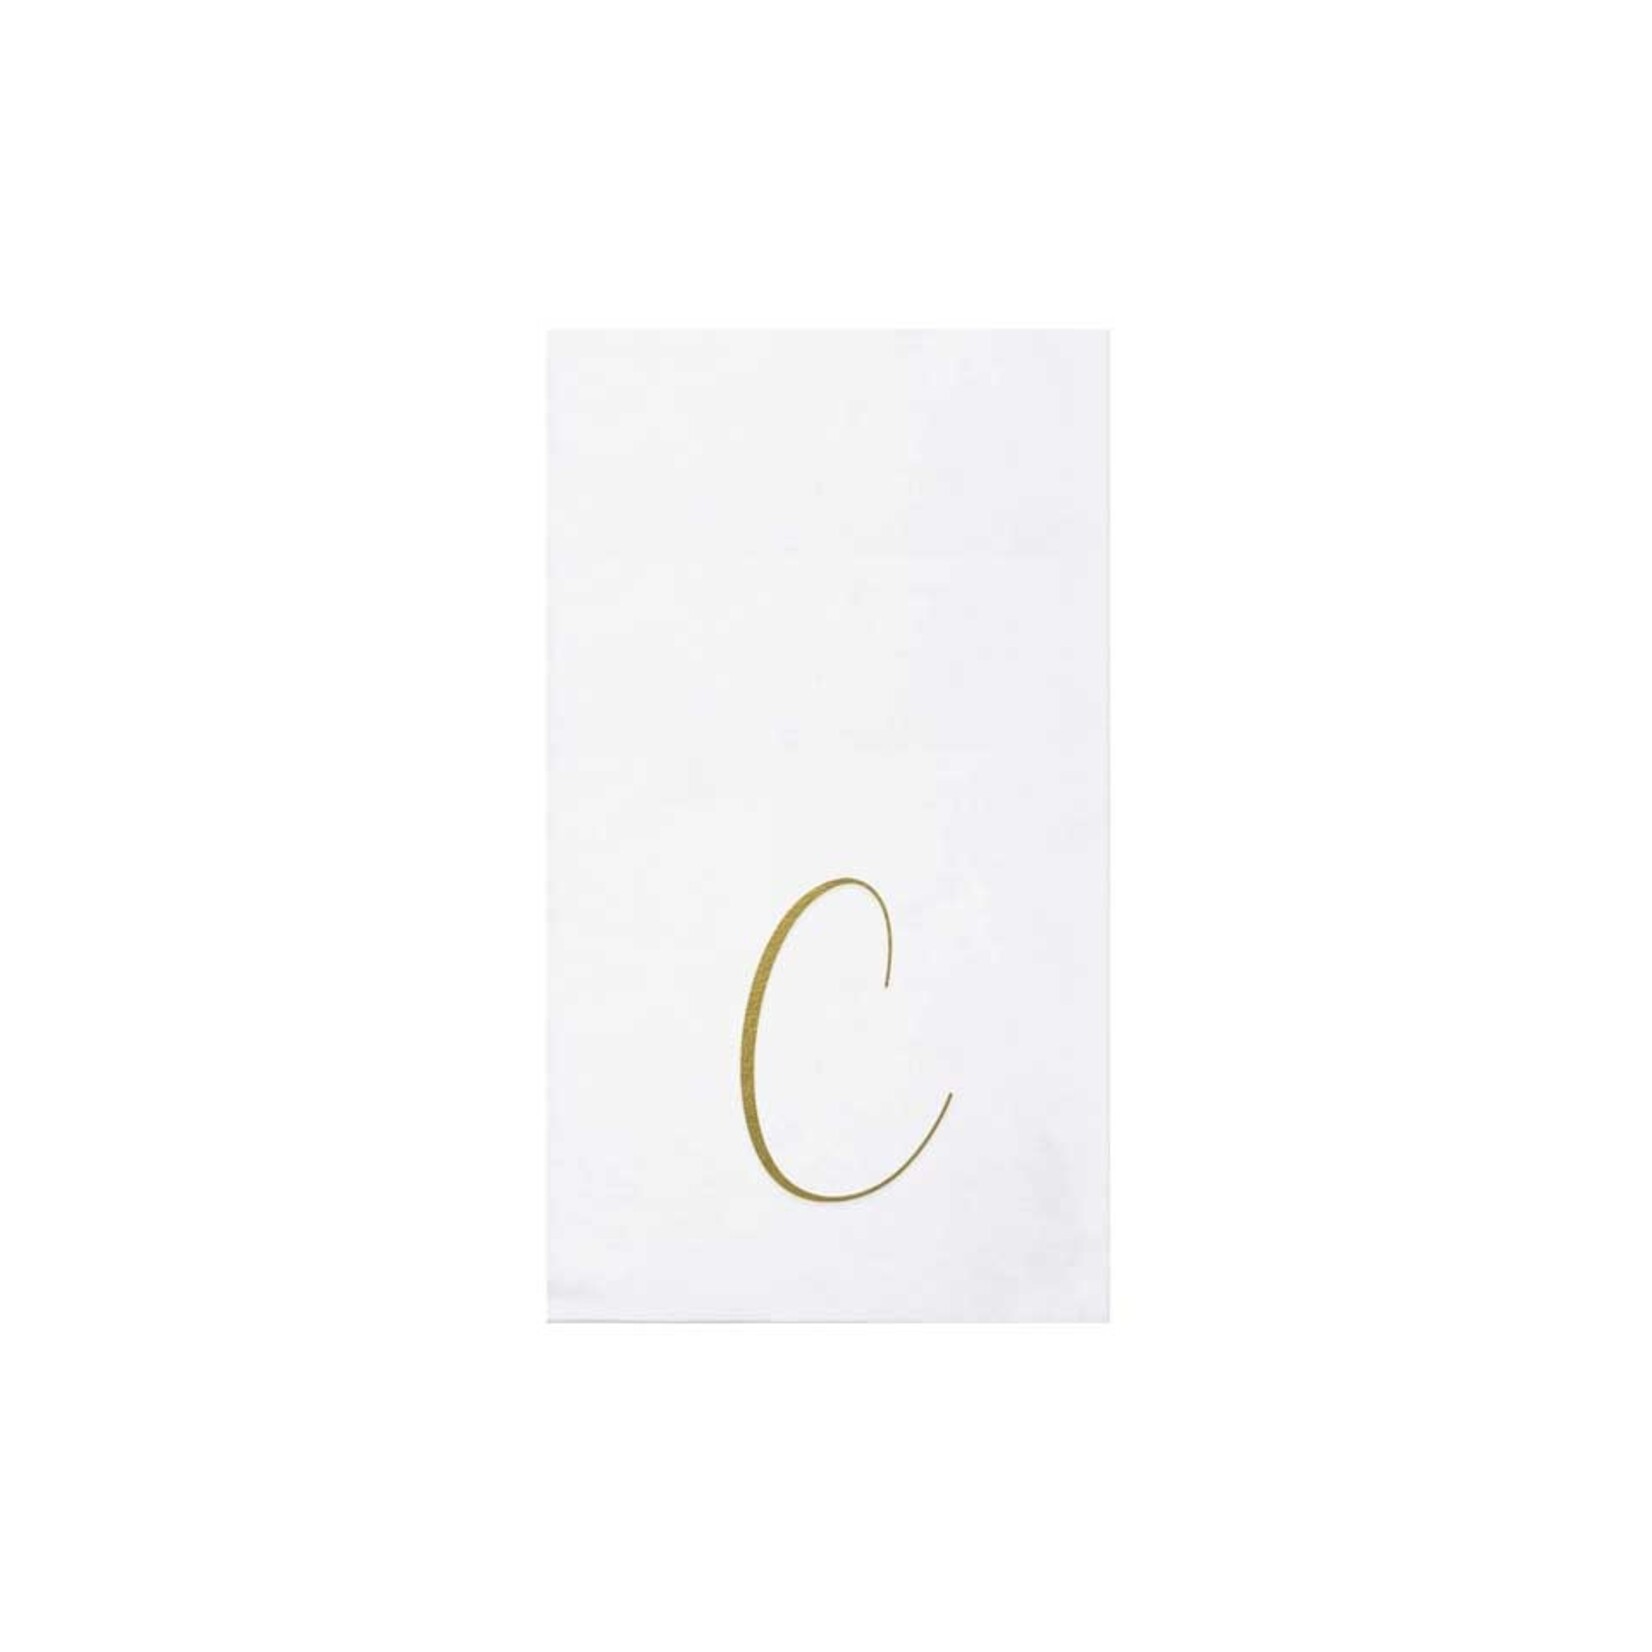 VIETRI Papersoft Napkins Gold Monogram Guest Towels - C (Pack of 20)